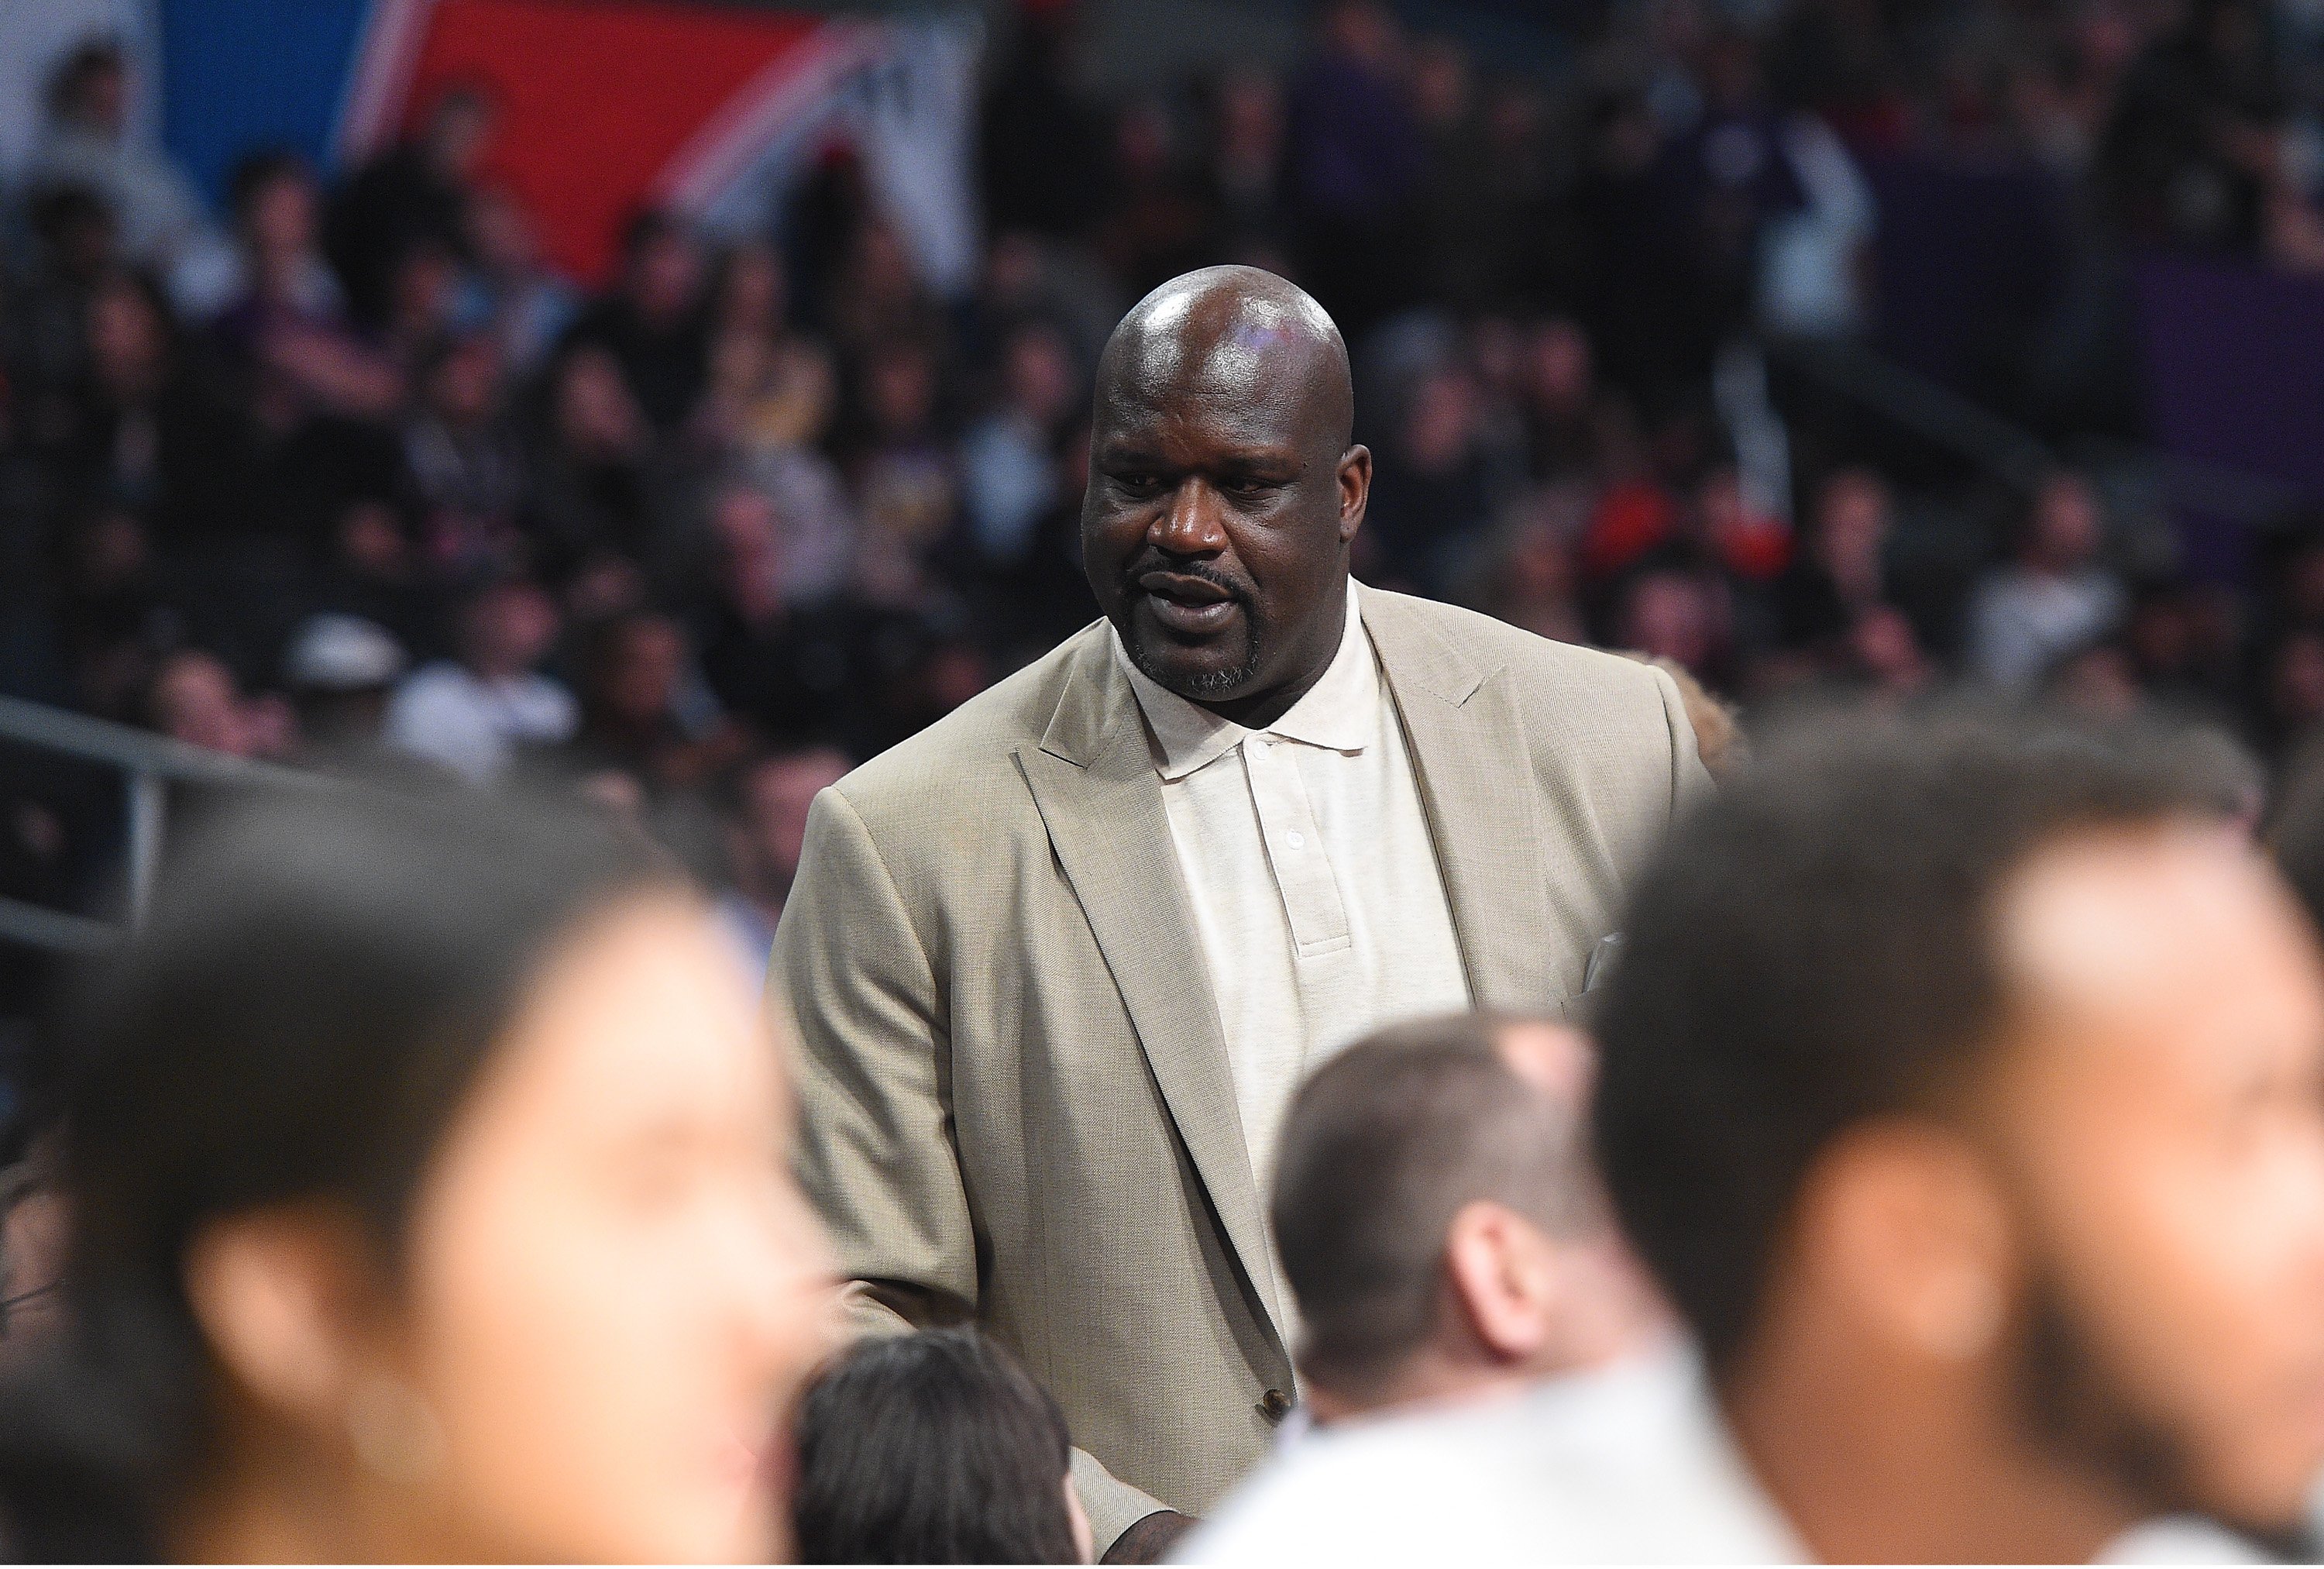 Shaquille O'Neal attends the 2018 Mountain Dew Kickstart Rising Stars Game at Staples Center on February 16, 2018 | Photo: GettyImages